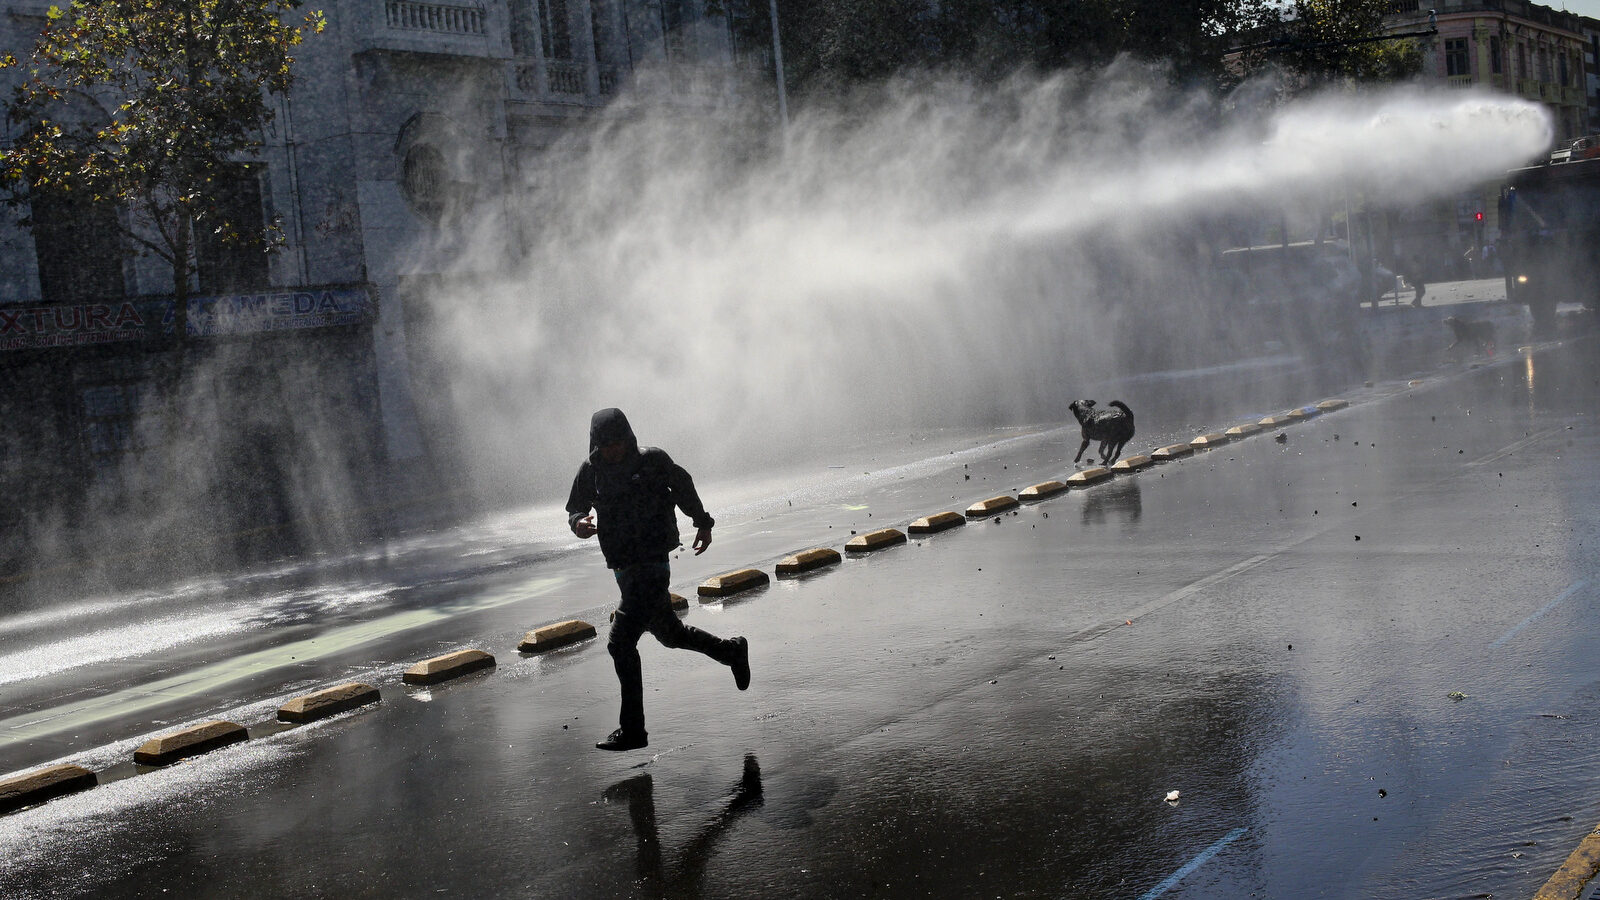 A demonstrator runs for cover as a police water cannon fires on them during a protest march demanding education reform, in Santiago, Chile, Tuesday, April 11, 2017. The demonstrators are demanding free access to school for all ages including at university level. (AP/Esteban Felix)